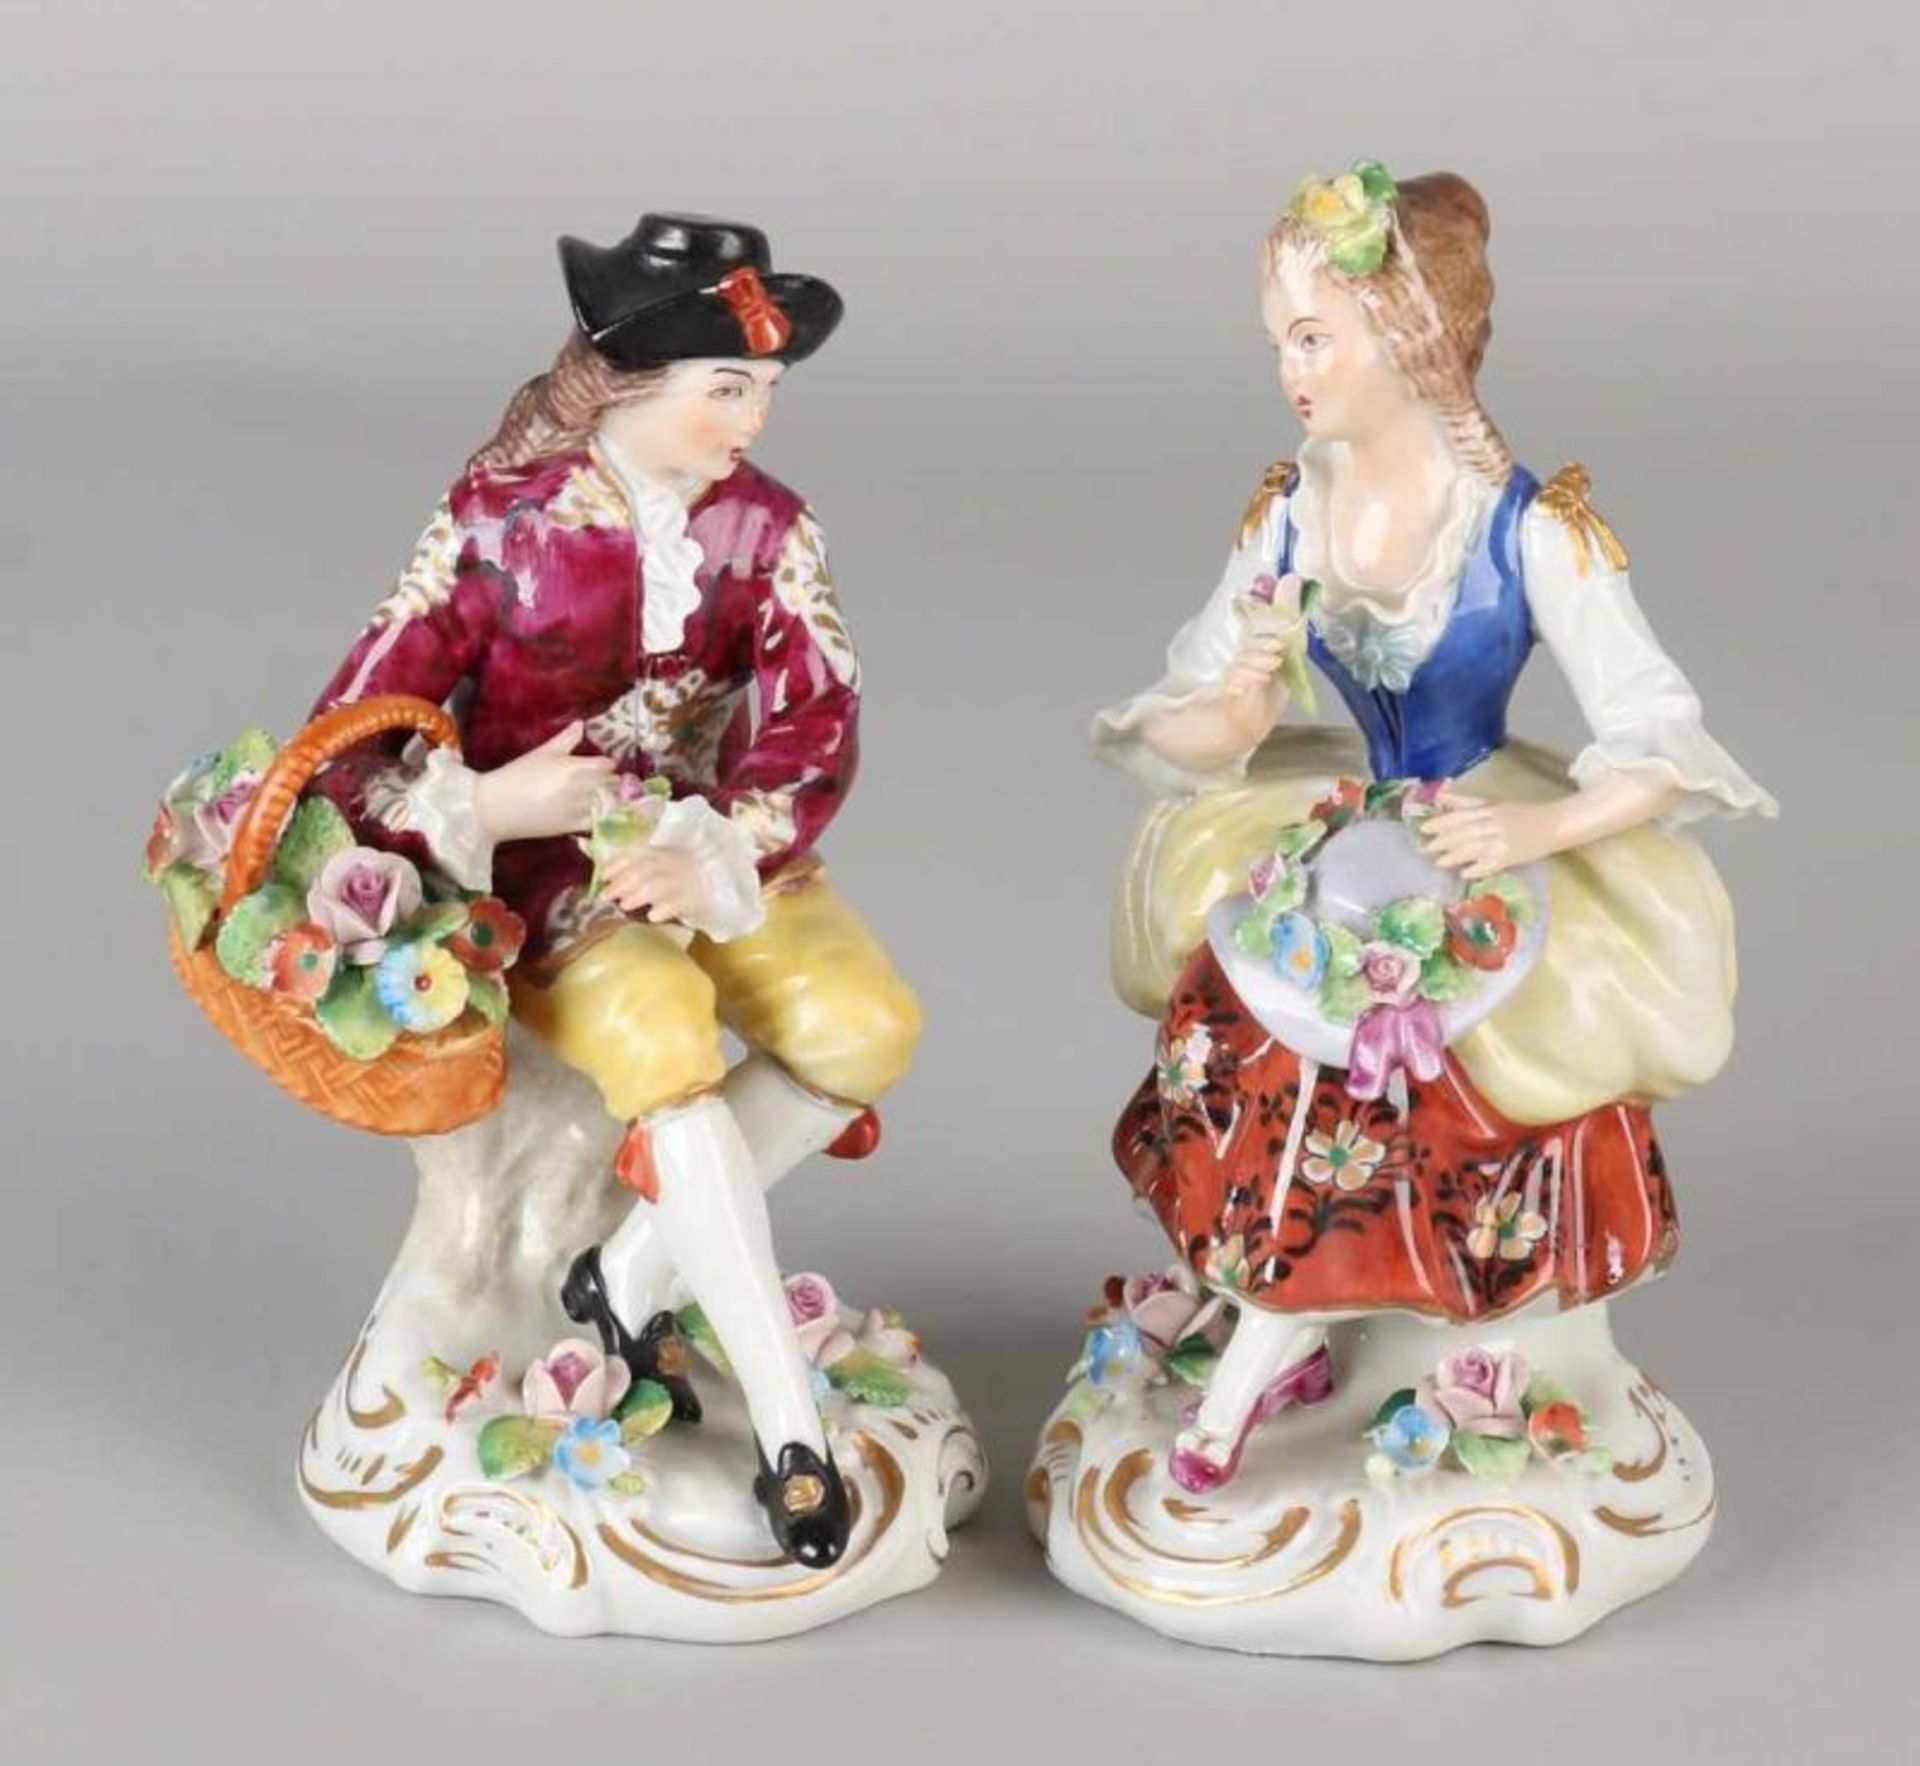 Two old German Sitzendorf porcelain figures. Man and woman with flowers. Minimum chip. 20th century.